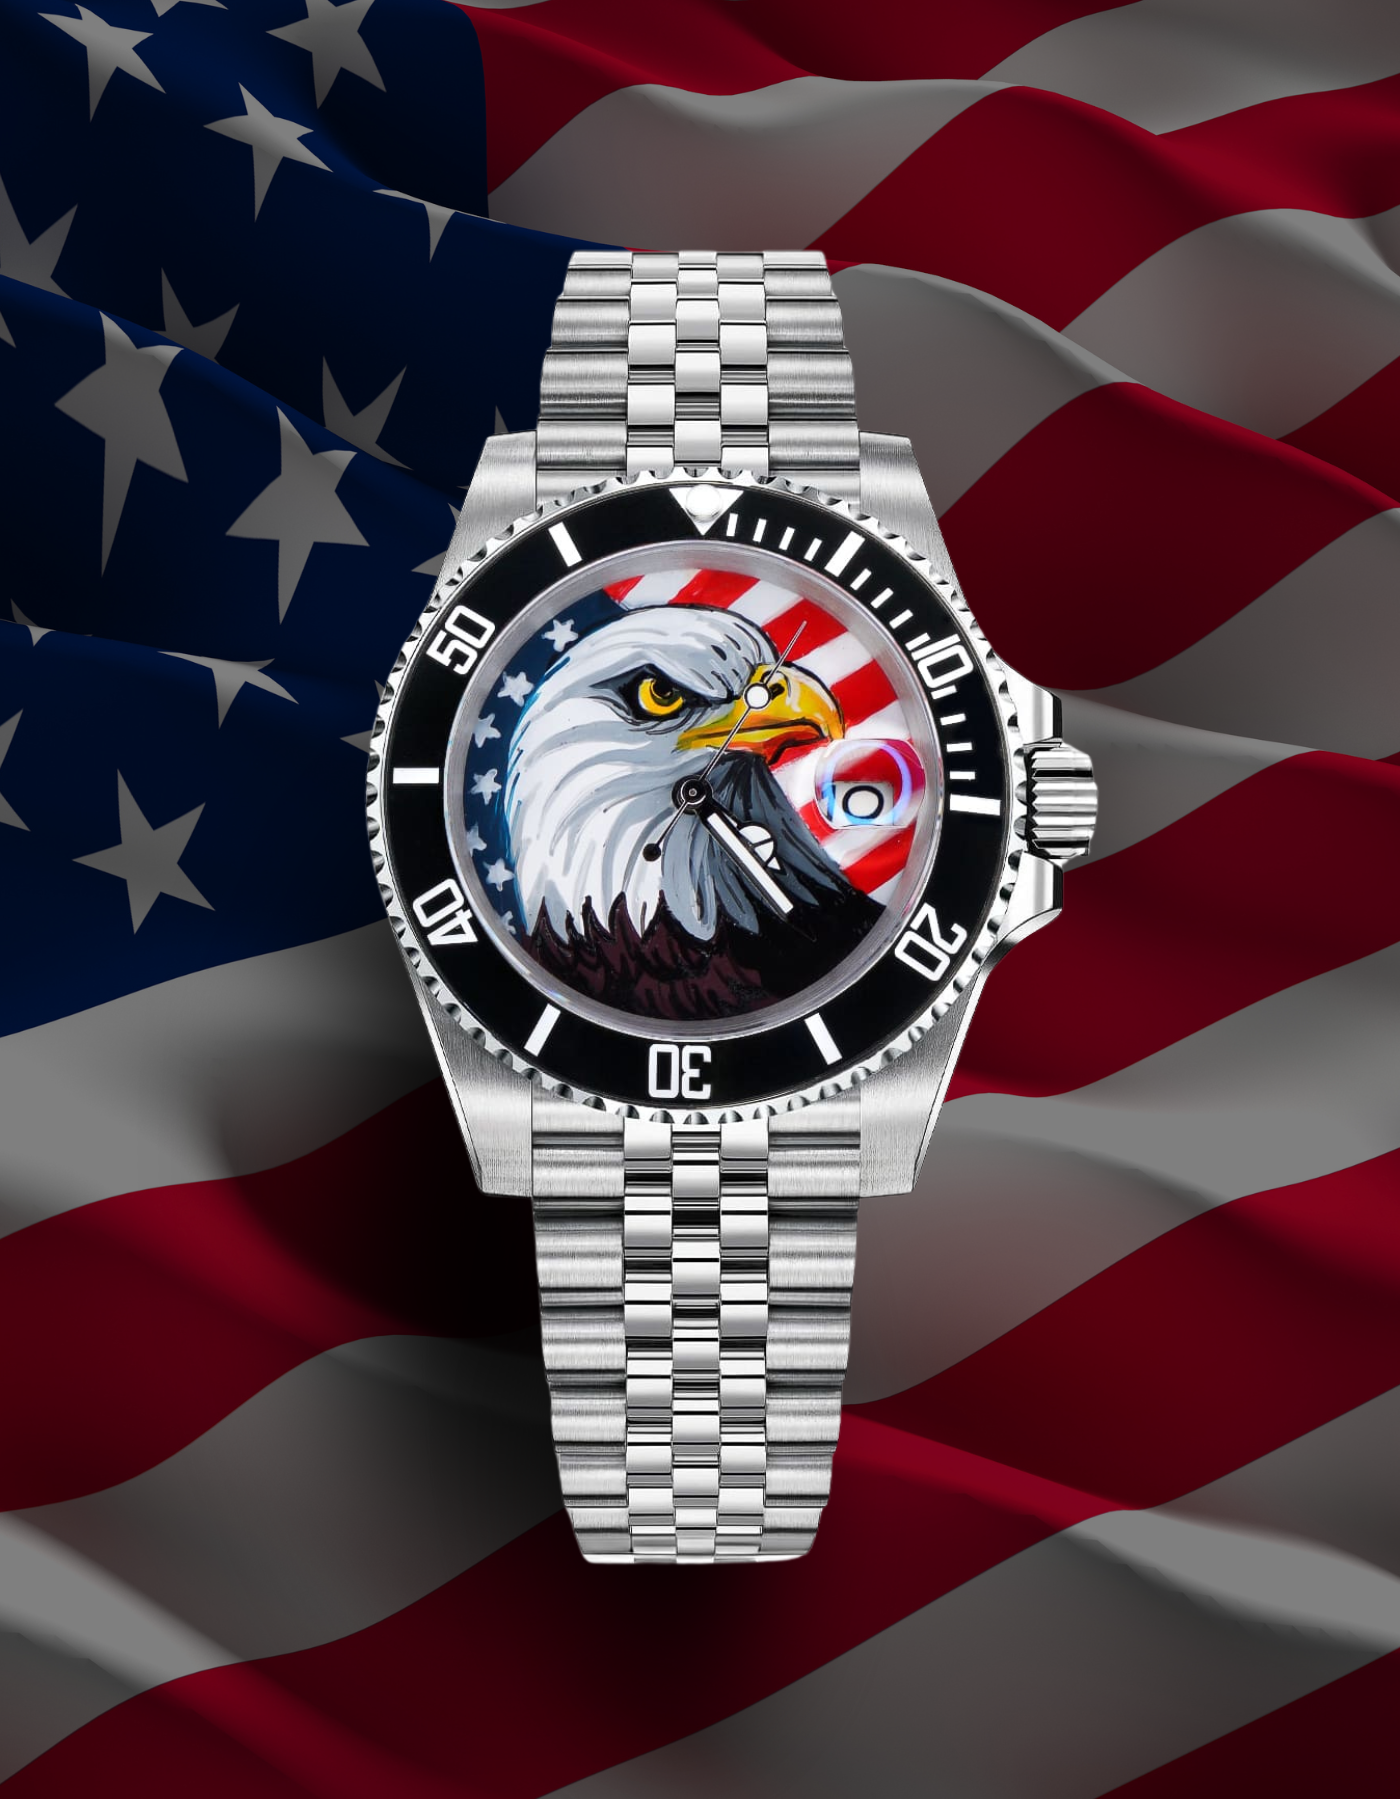 SM 01-35S - The American Wings - Hand-Painted Edition